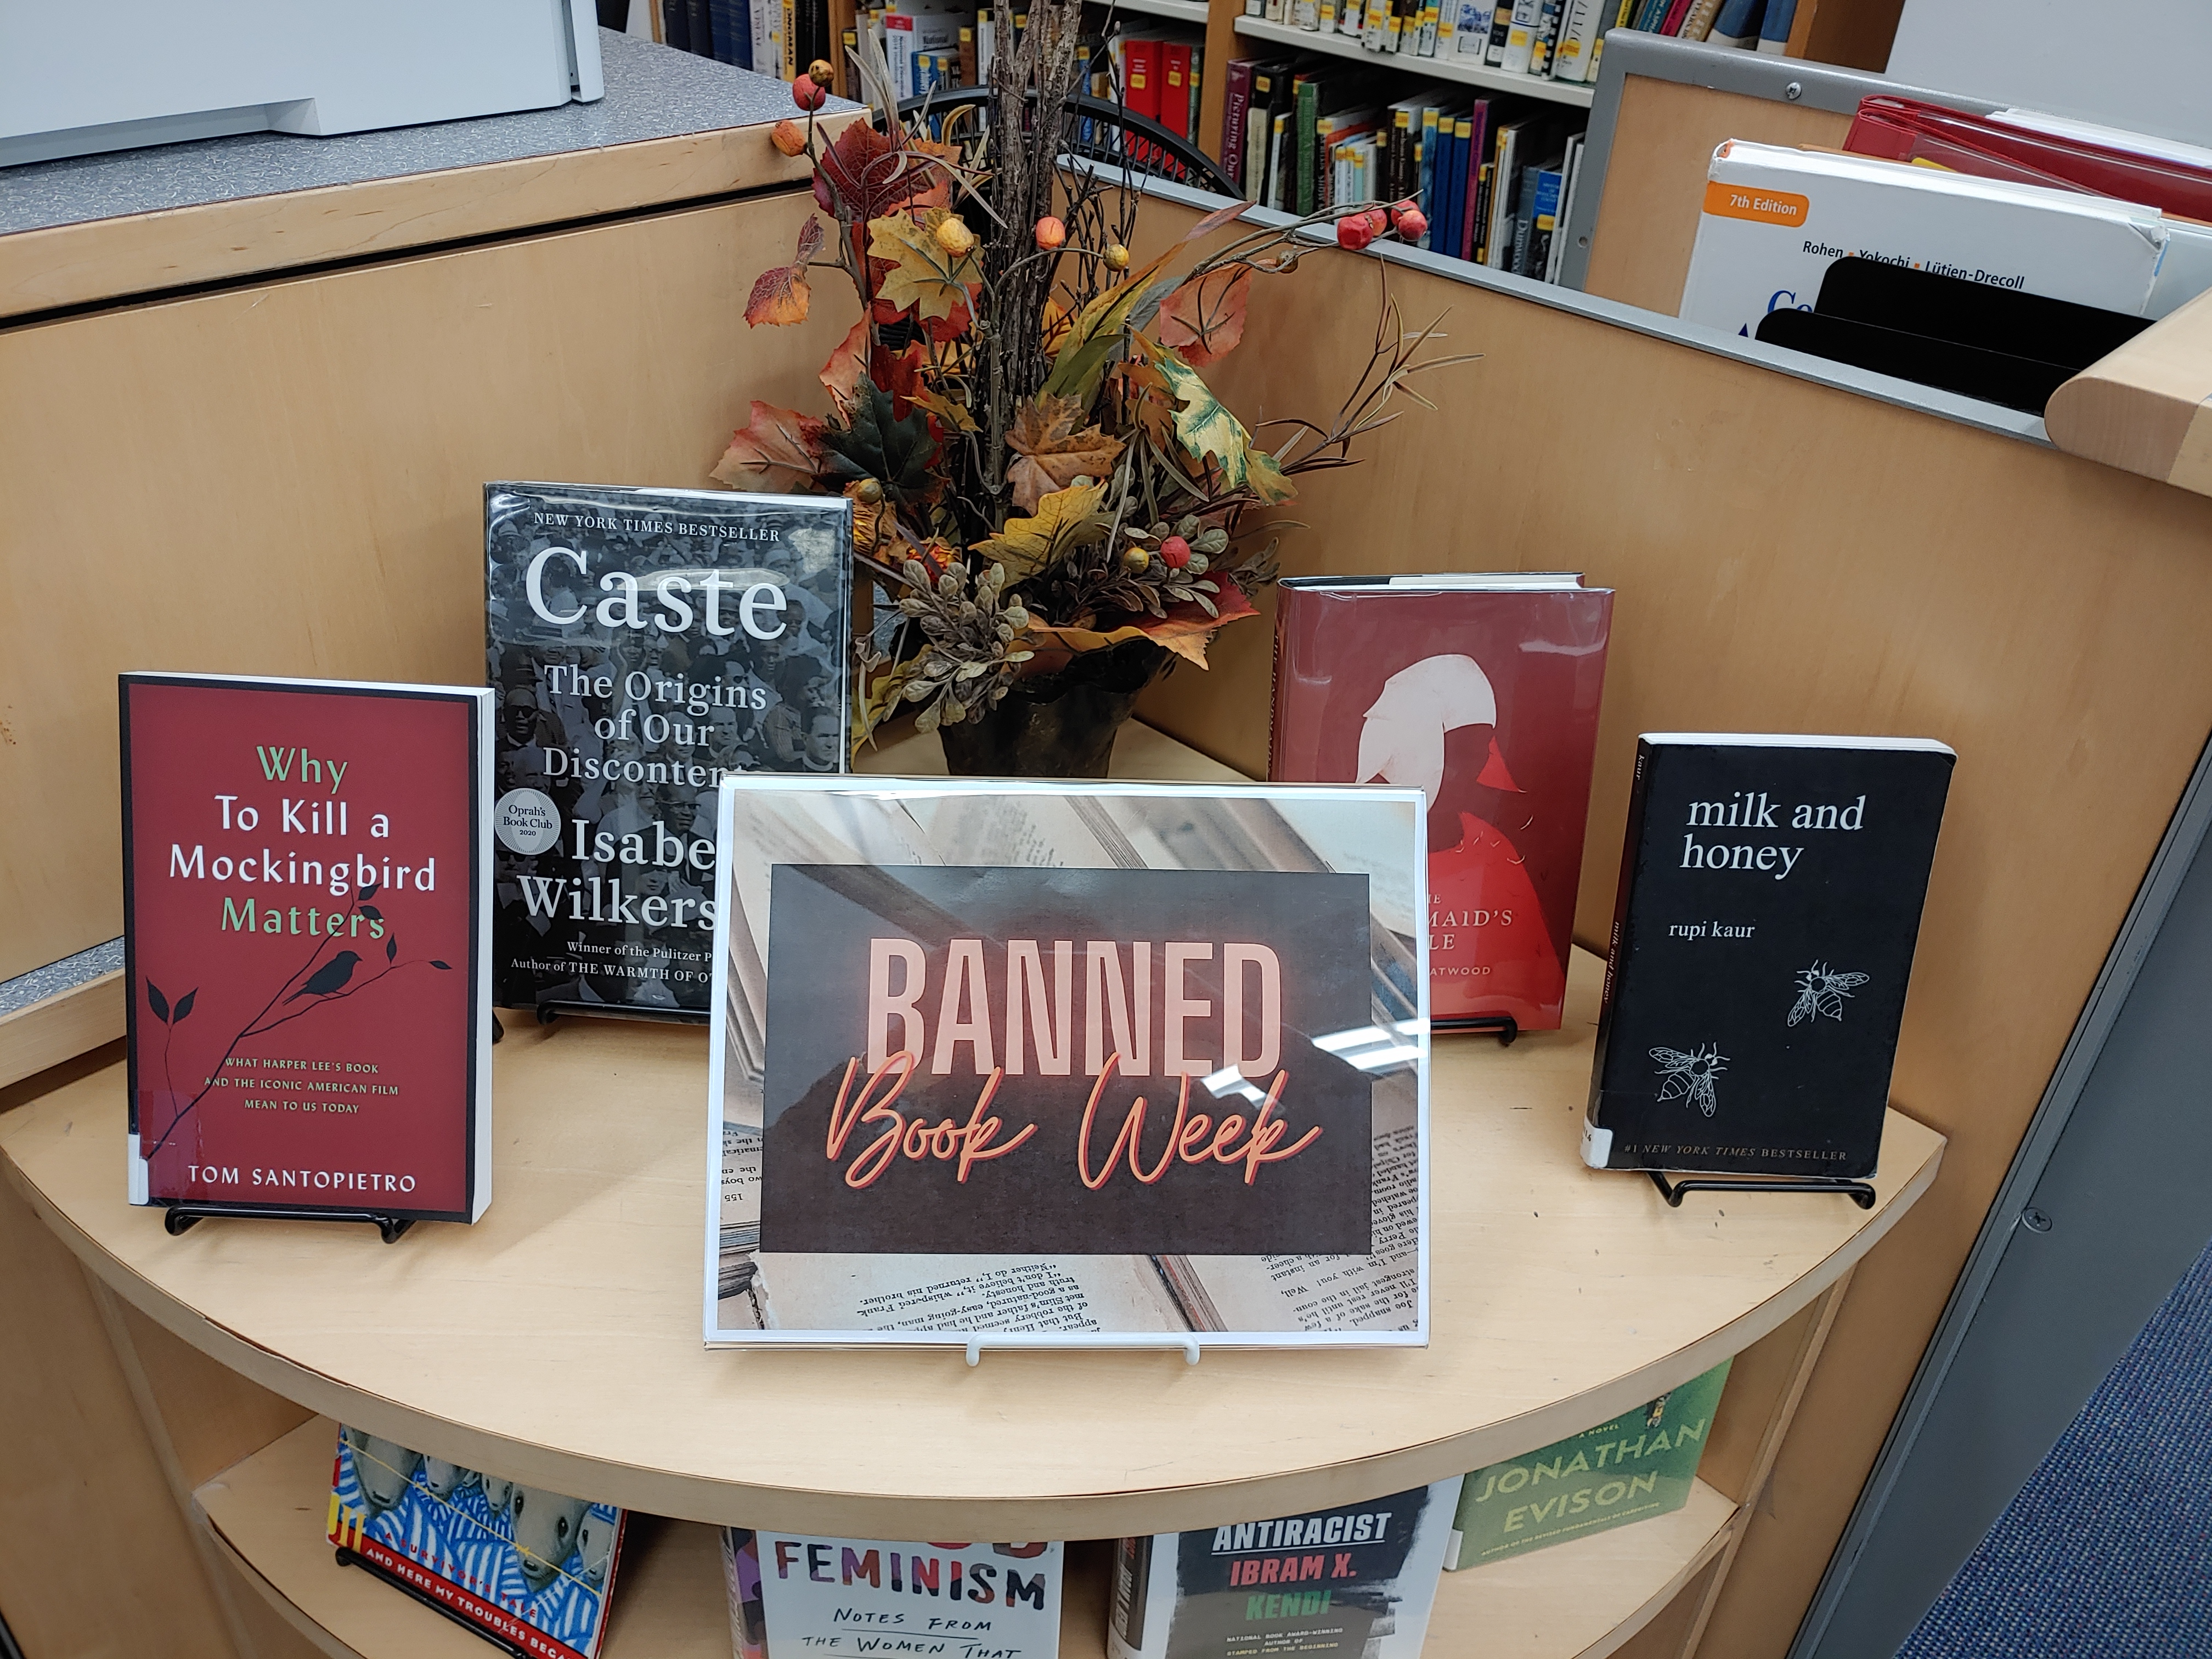 A small bookshelf with four books and a sign reading "Banned Books Week." From left to right, the books are To Kill a Mockingbird, Caste: The Origin of Our Discontents, The Handmaid's Tale, and Milk and Honey, by Rupi Kaur.